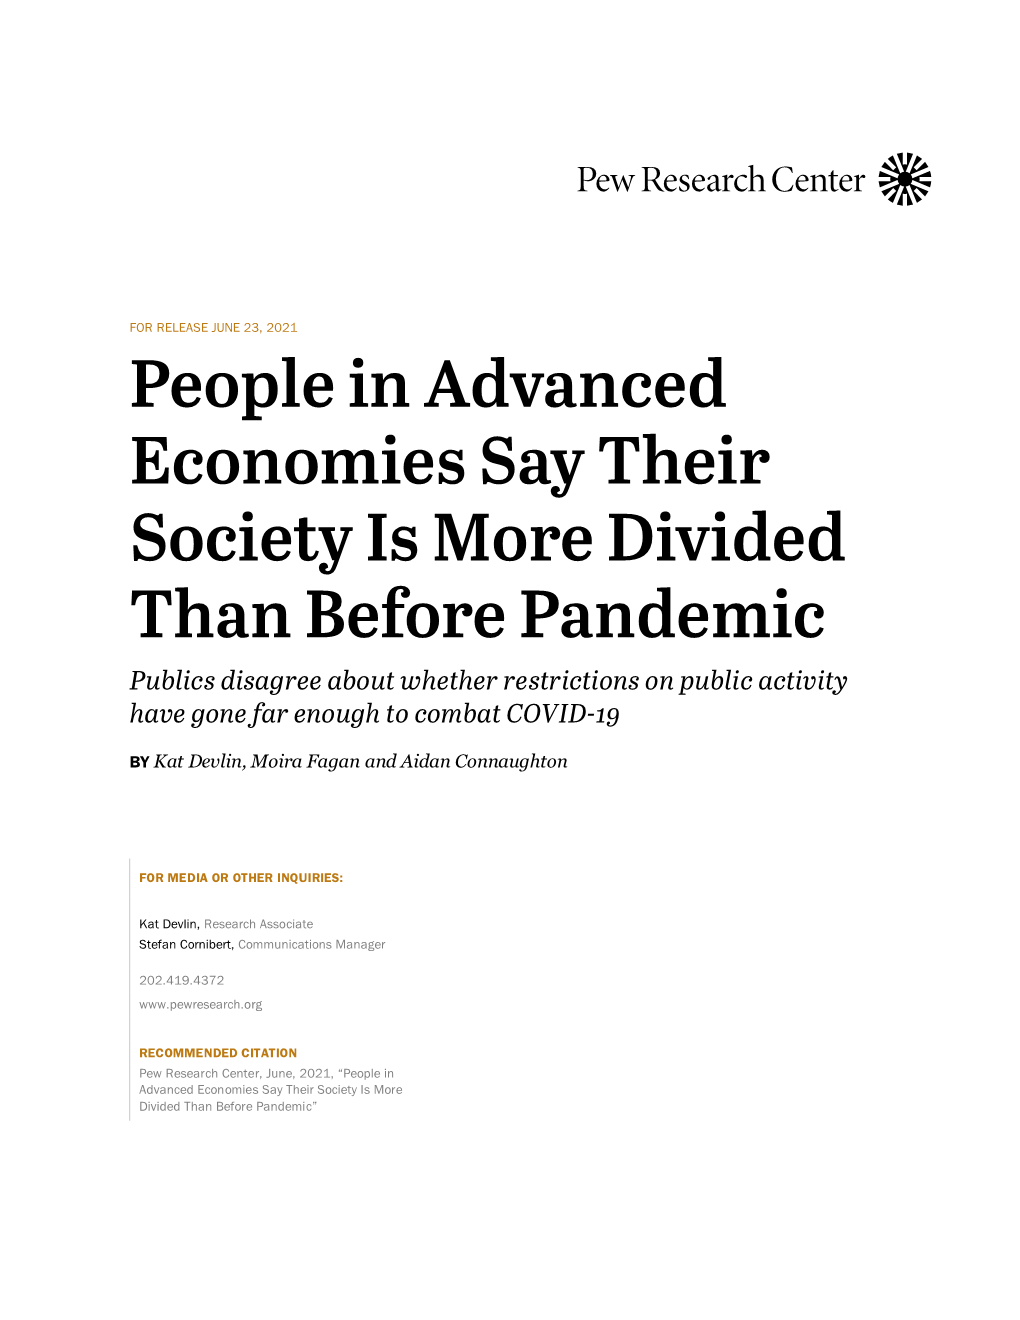 People in Advanced Economies Say Their Society Is More Divided Than